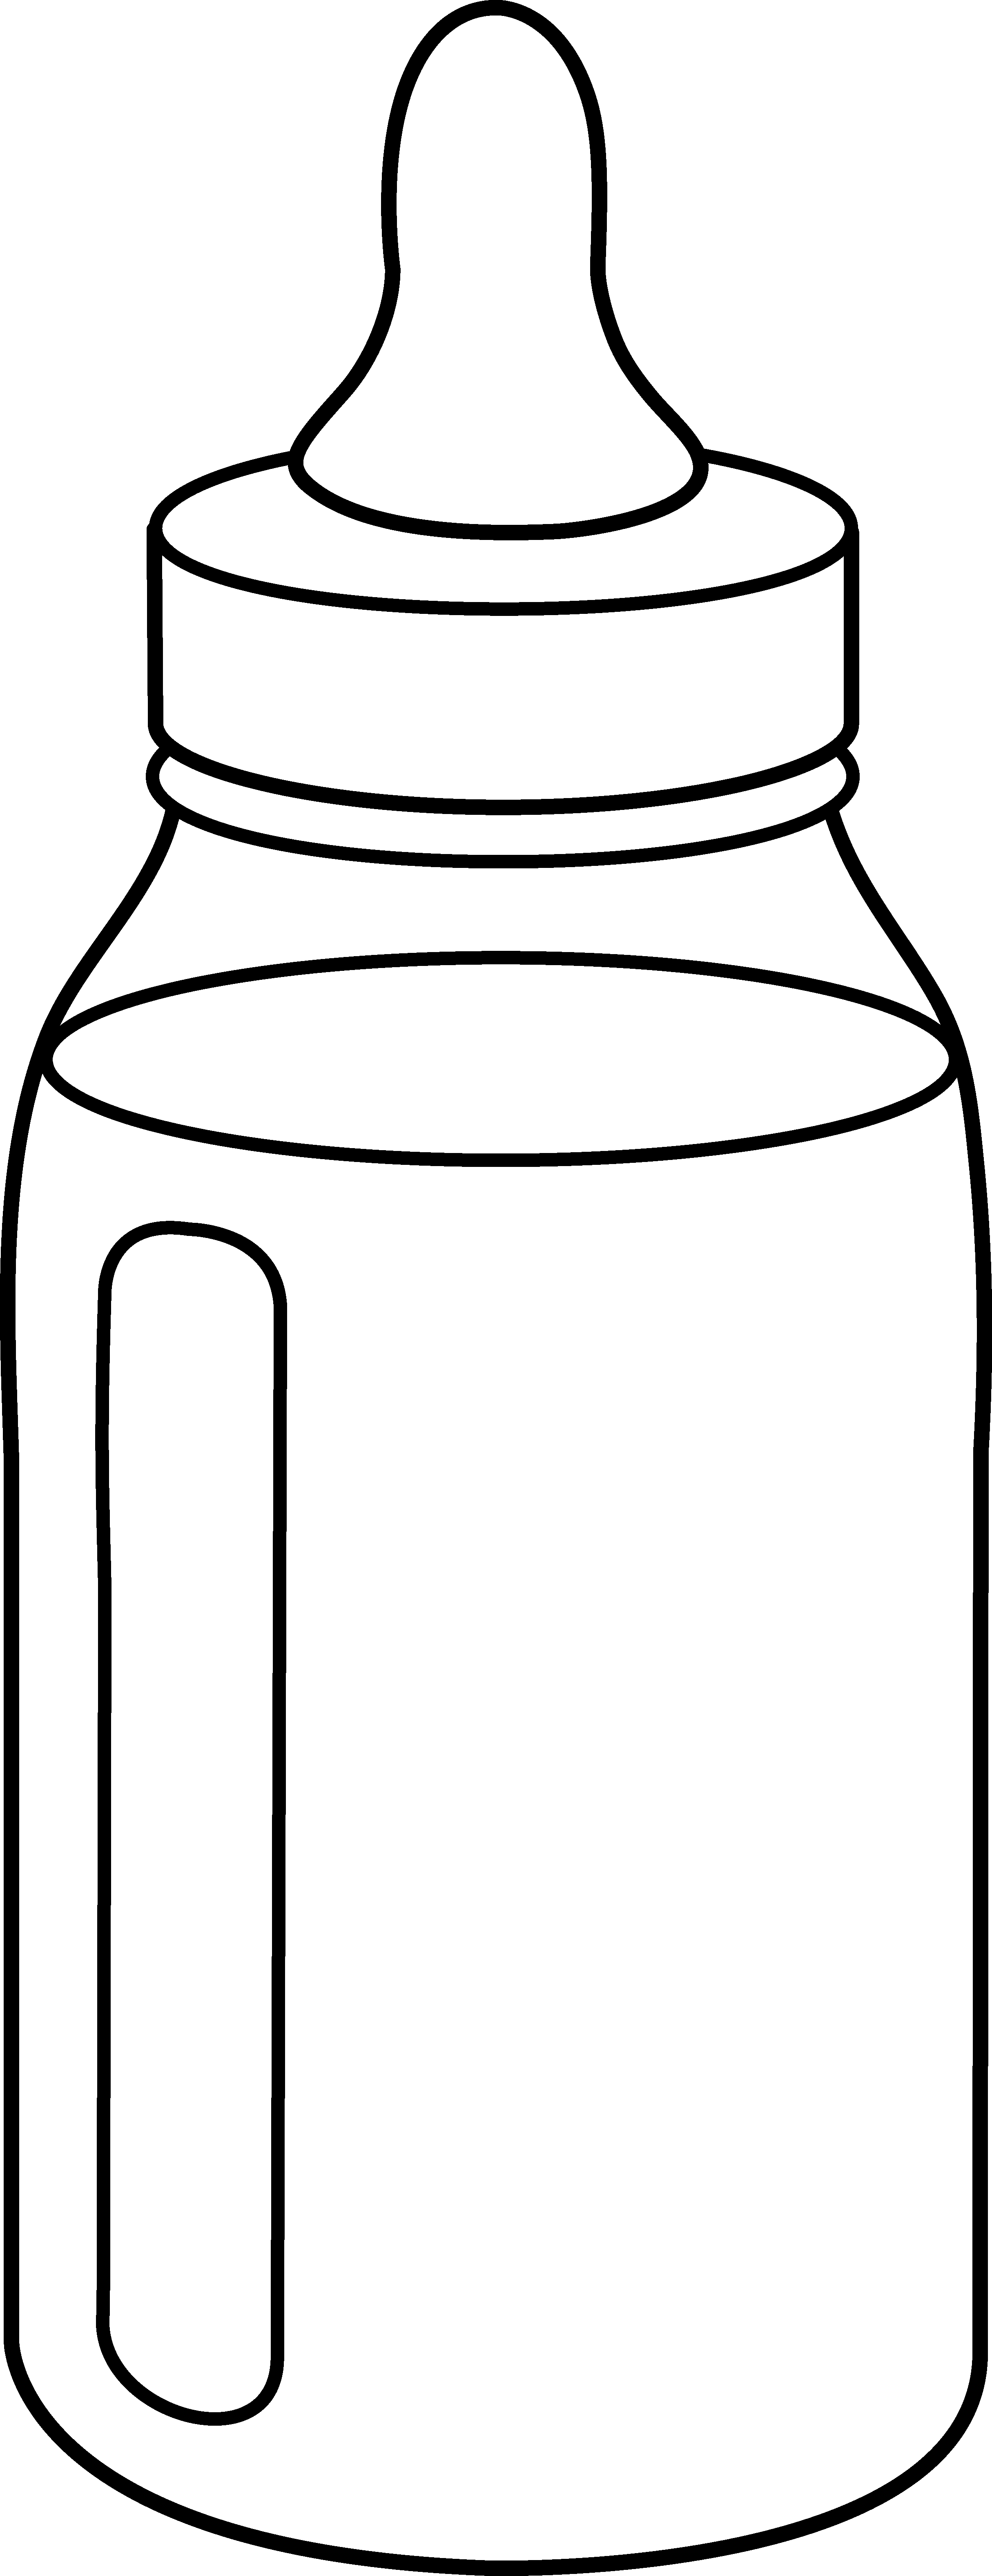 Free How To Draw A Baby Bottle, Download Free Clip Art, Free